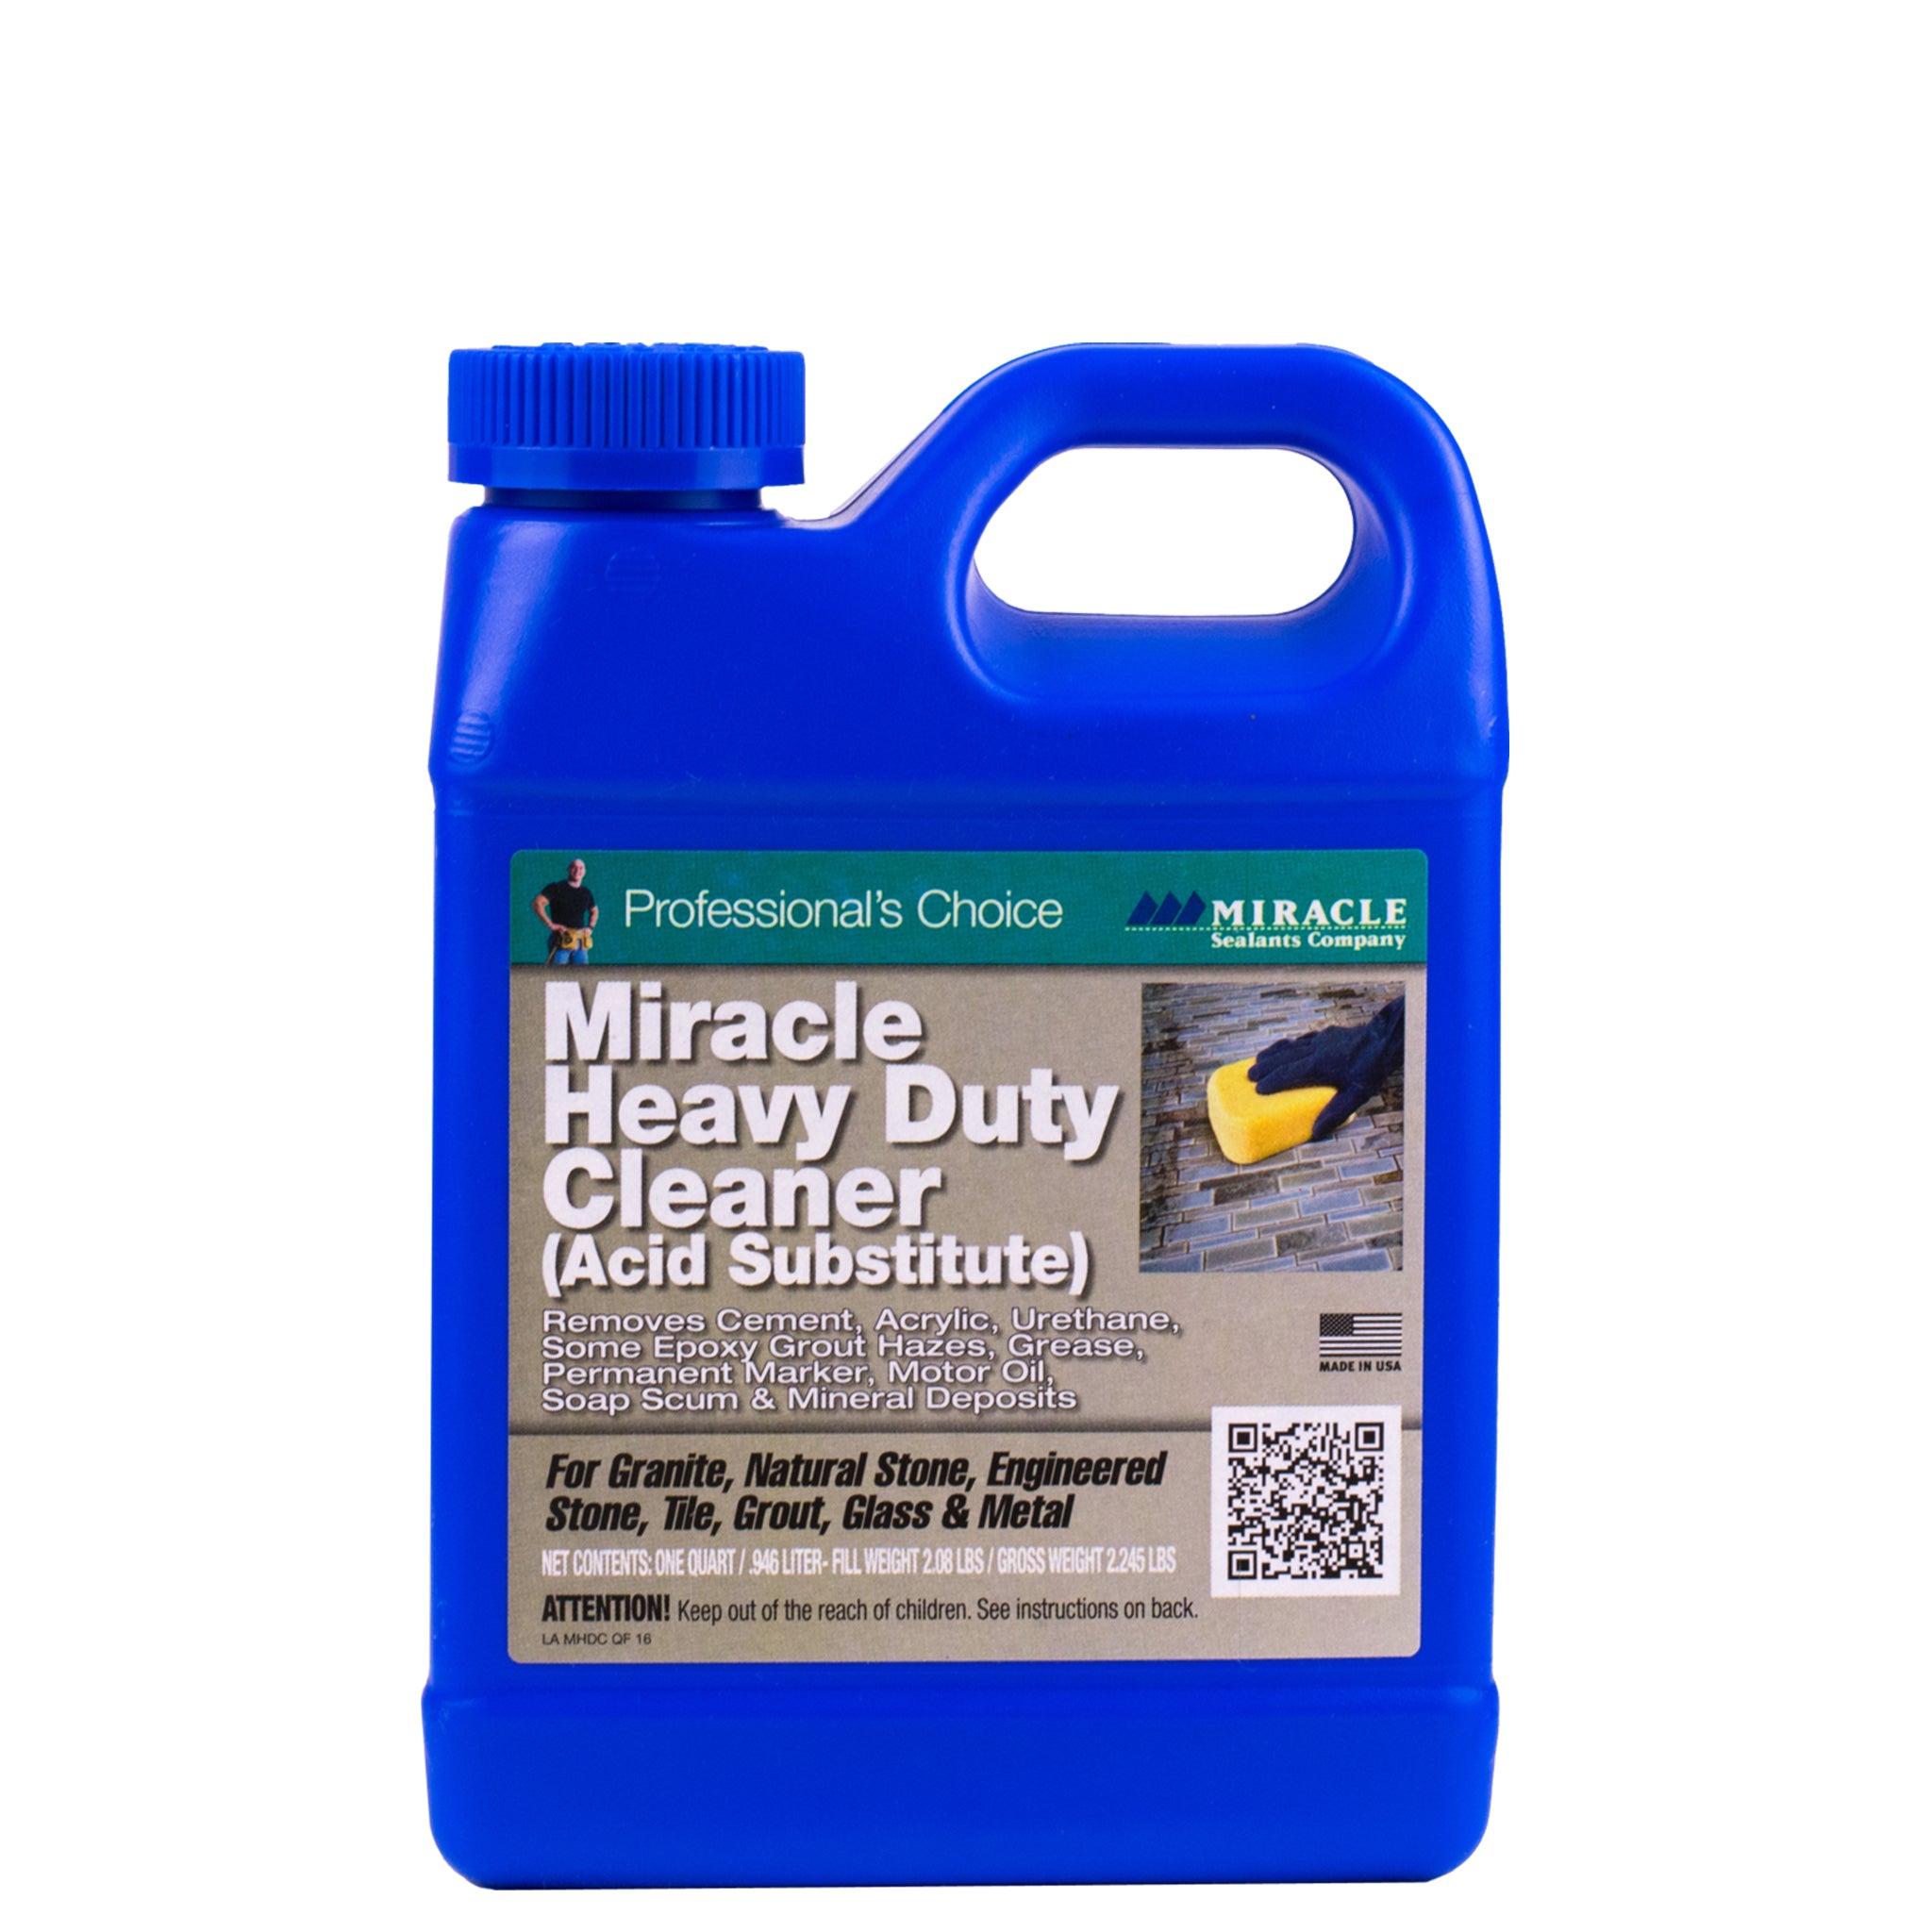 Miracle Heavy Duty Cleaner